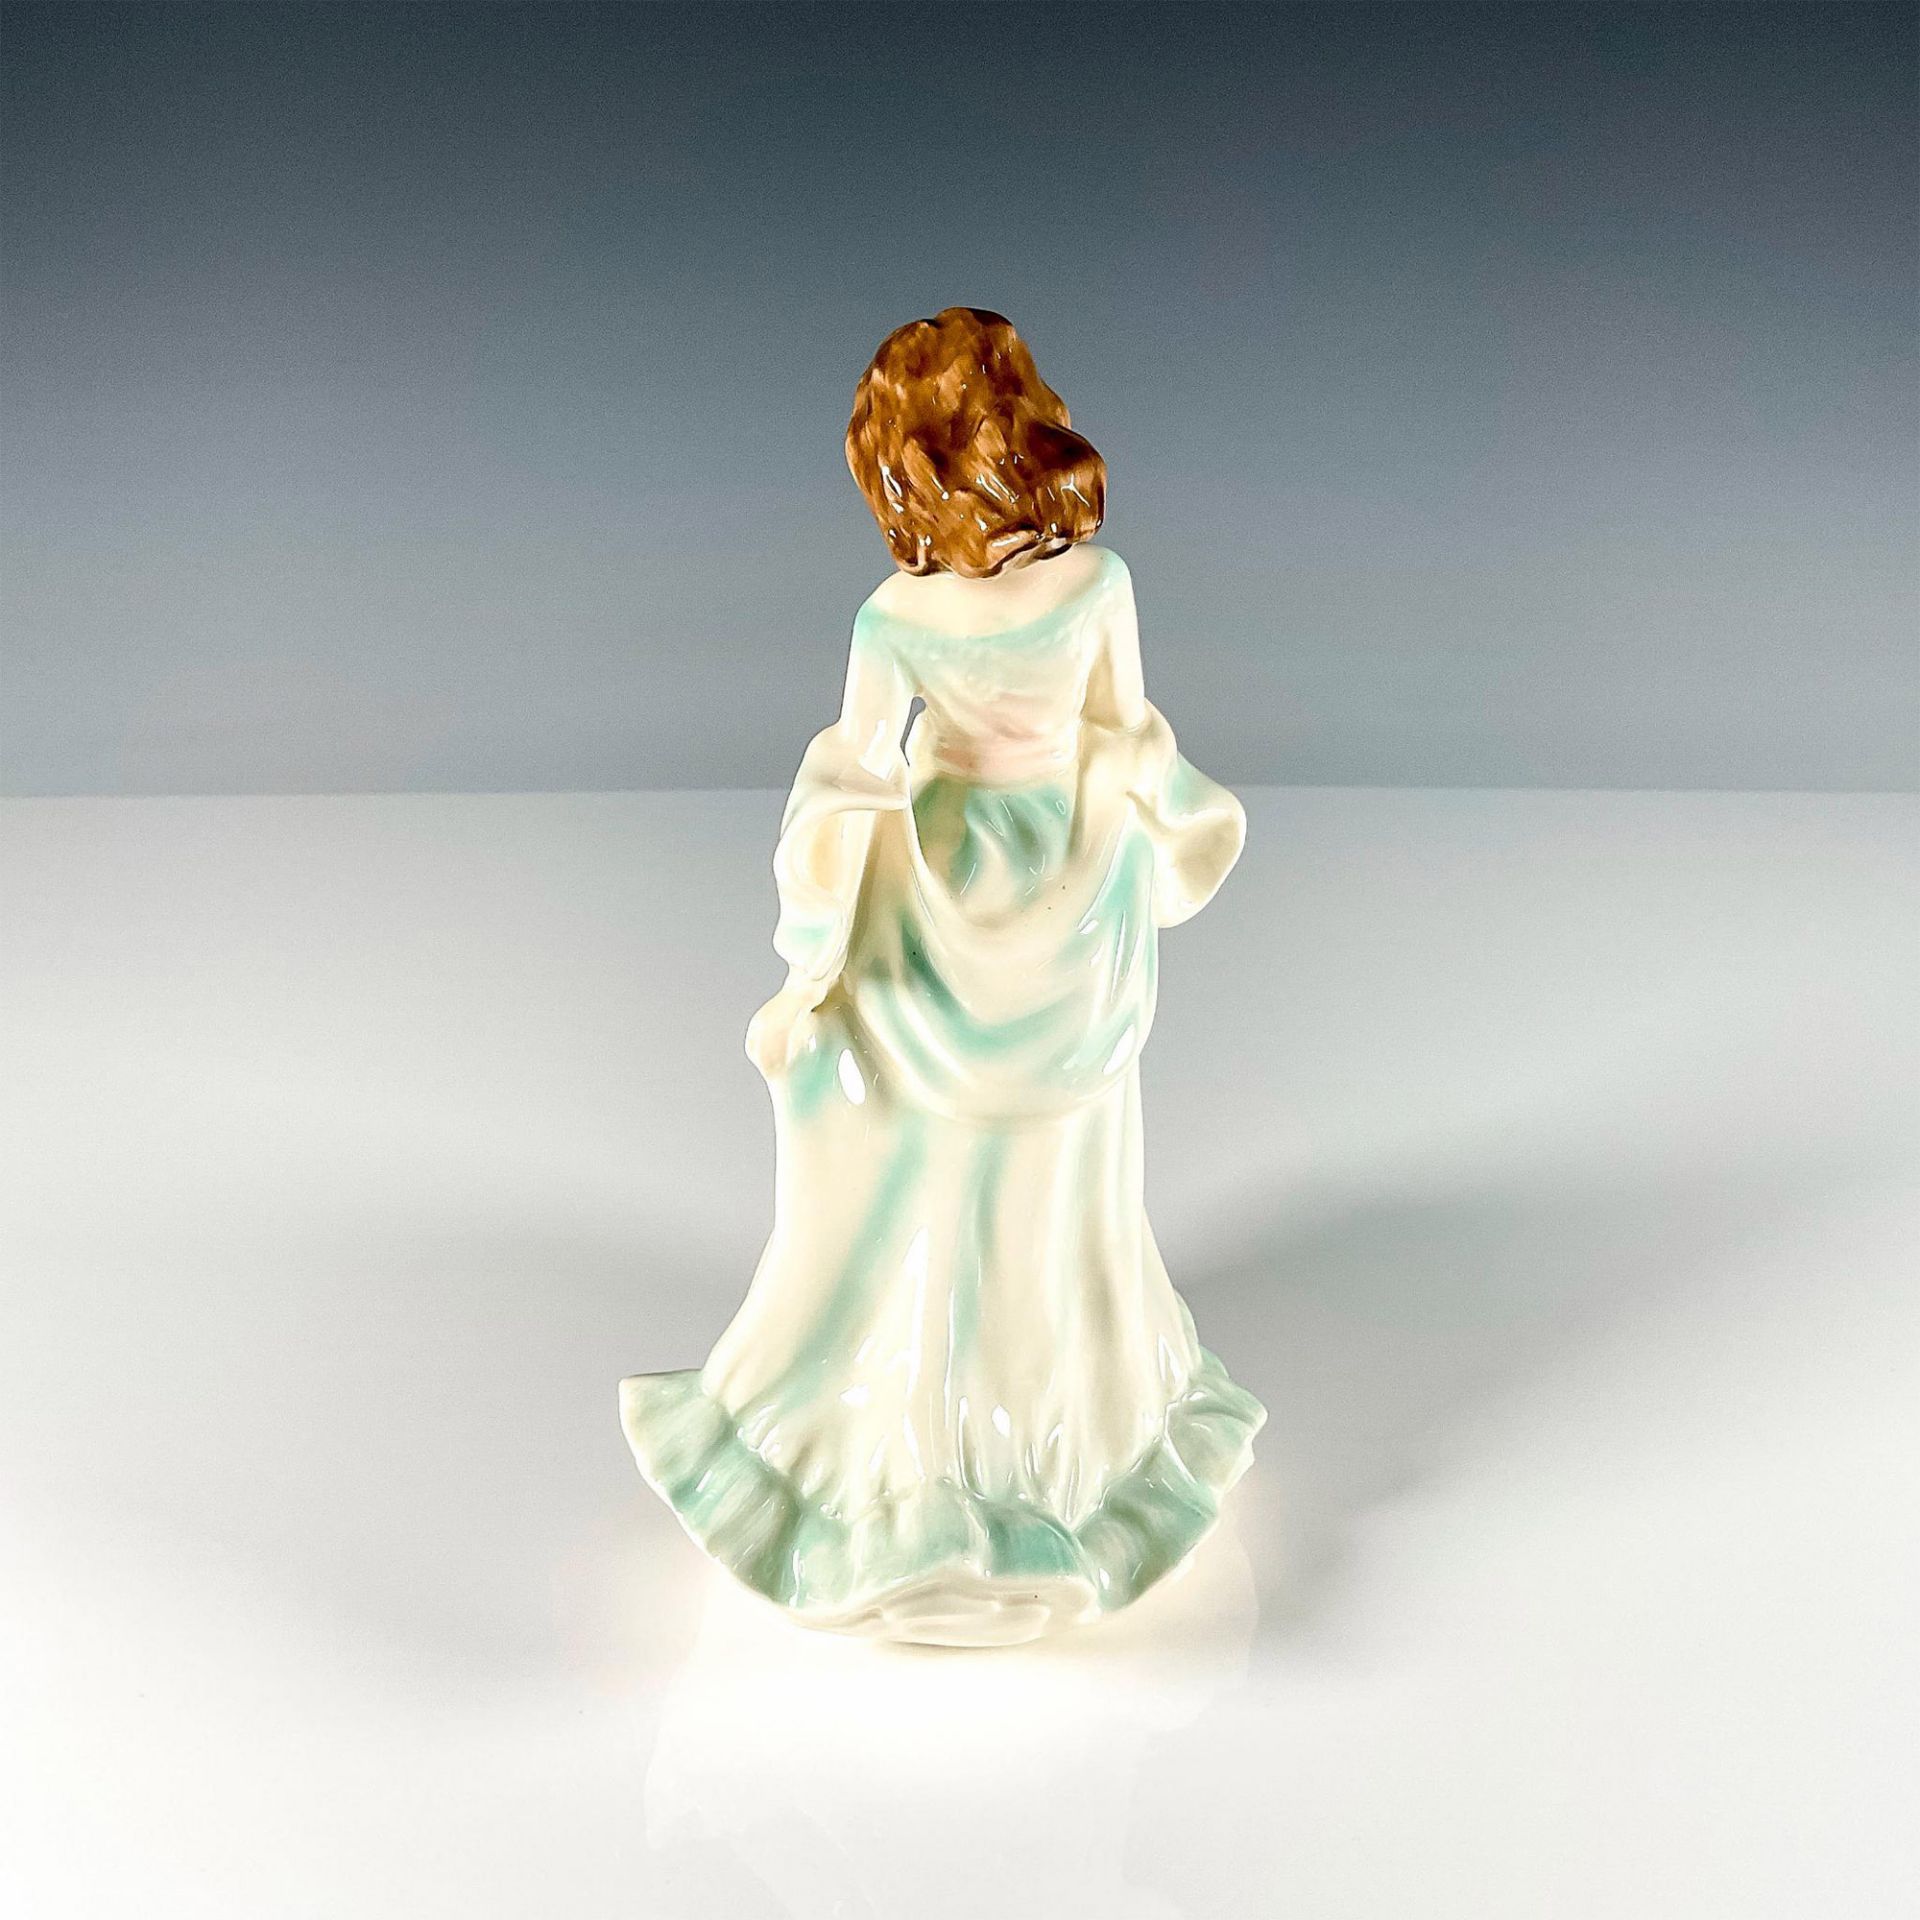 Lady In Dress - Royal Doulton Prototype Figurine - Image 2 of 4